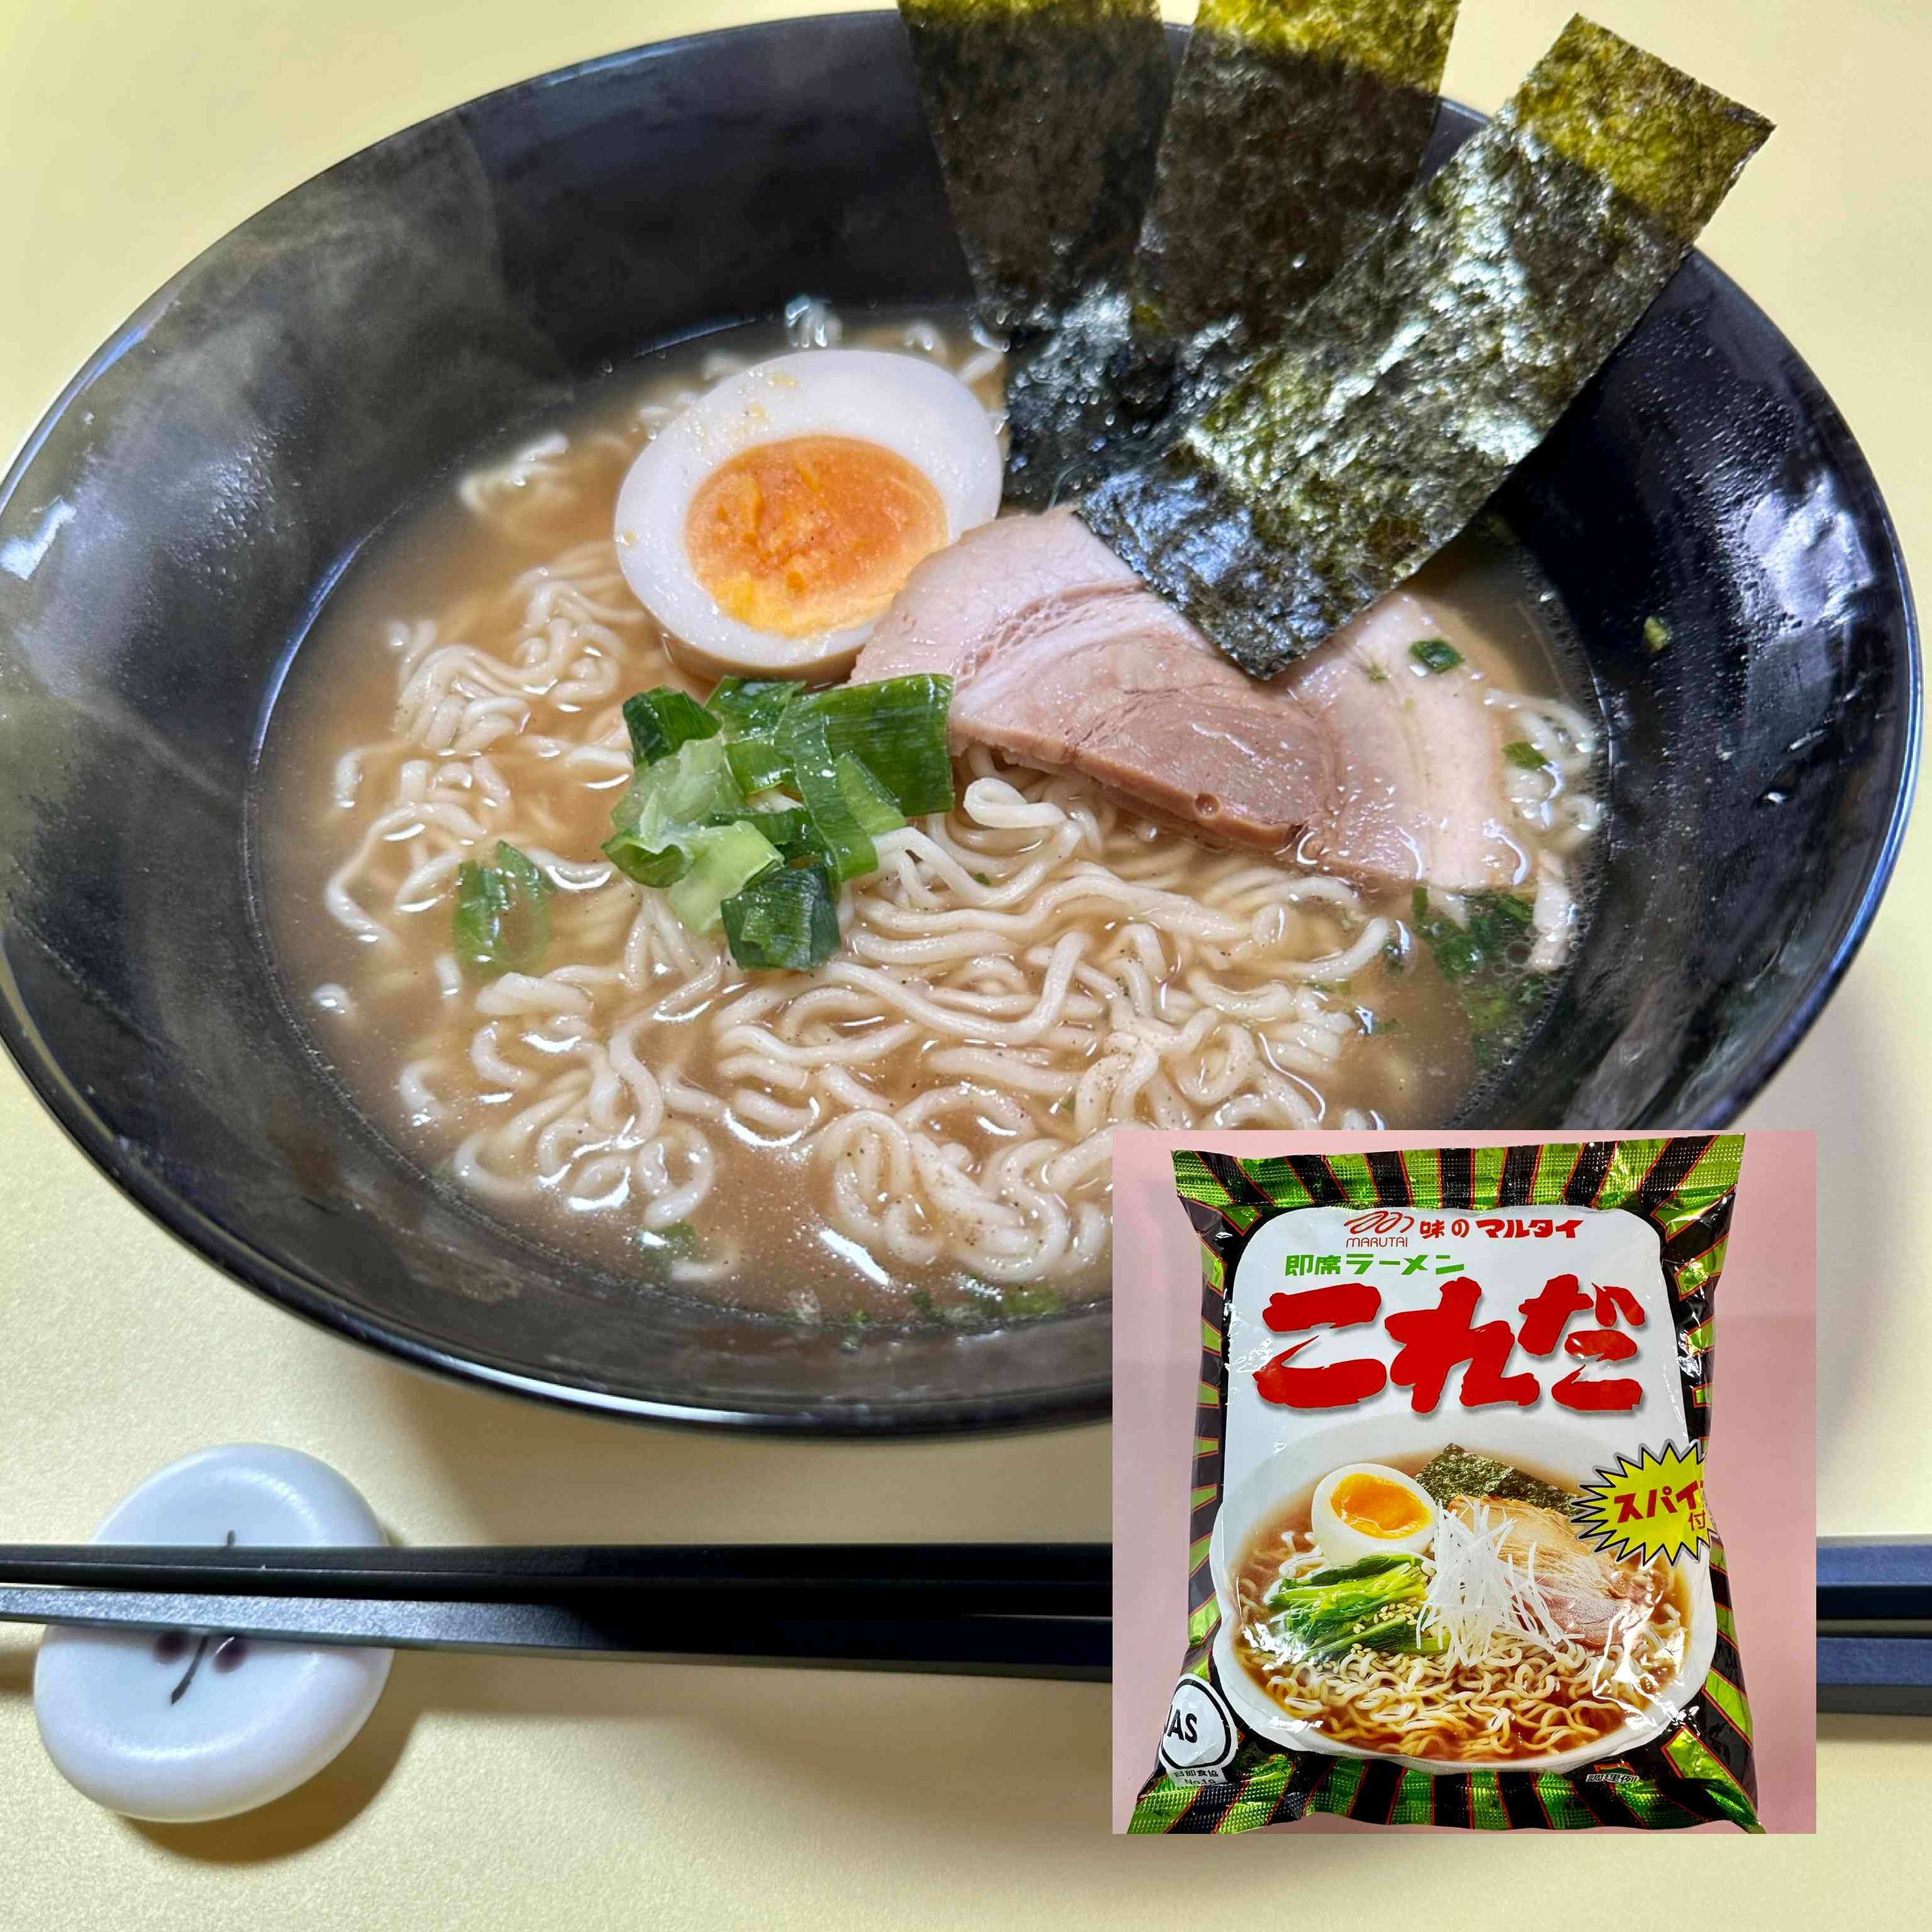 【MARUTAI】RAMEN「This is it」soy sauce flavor　1bag　87ｇ（Bagged noodles）